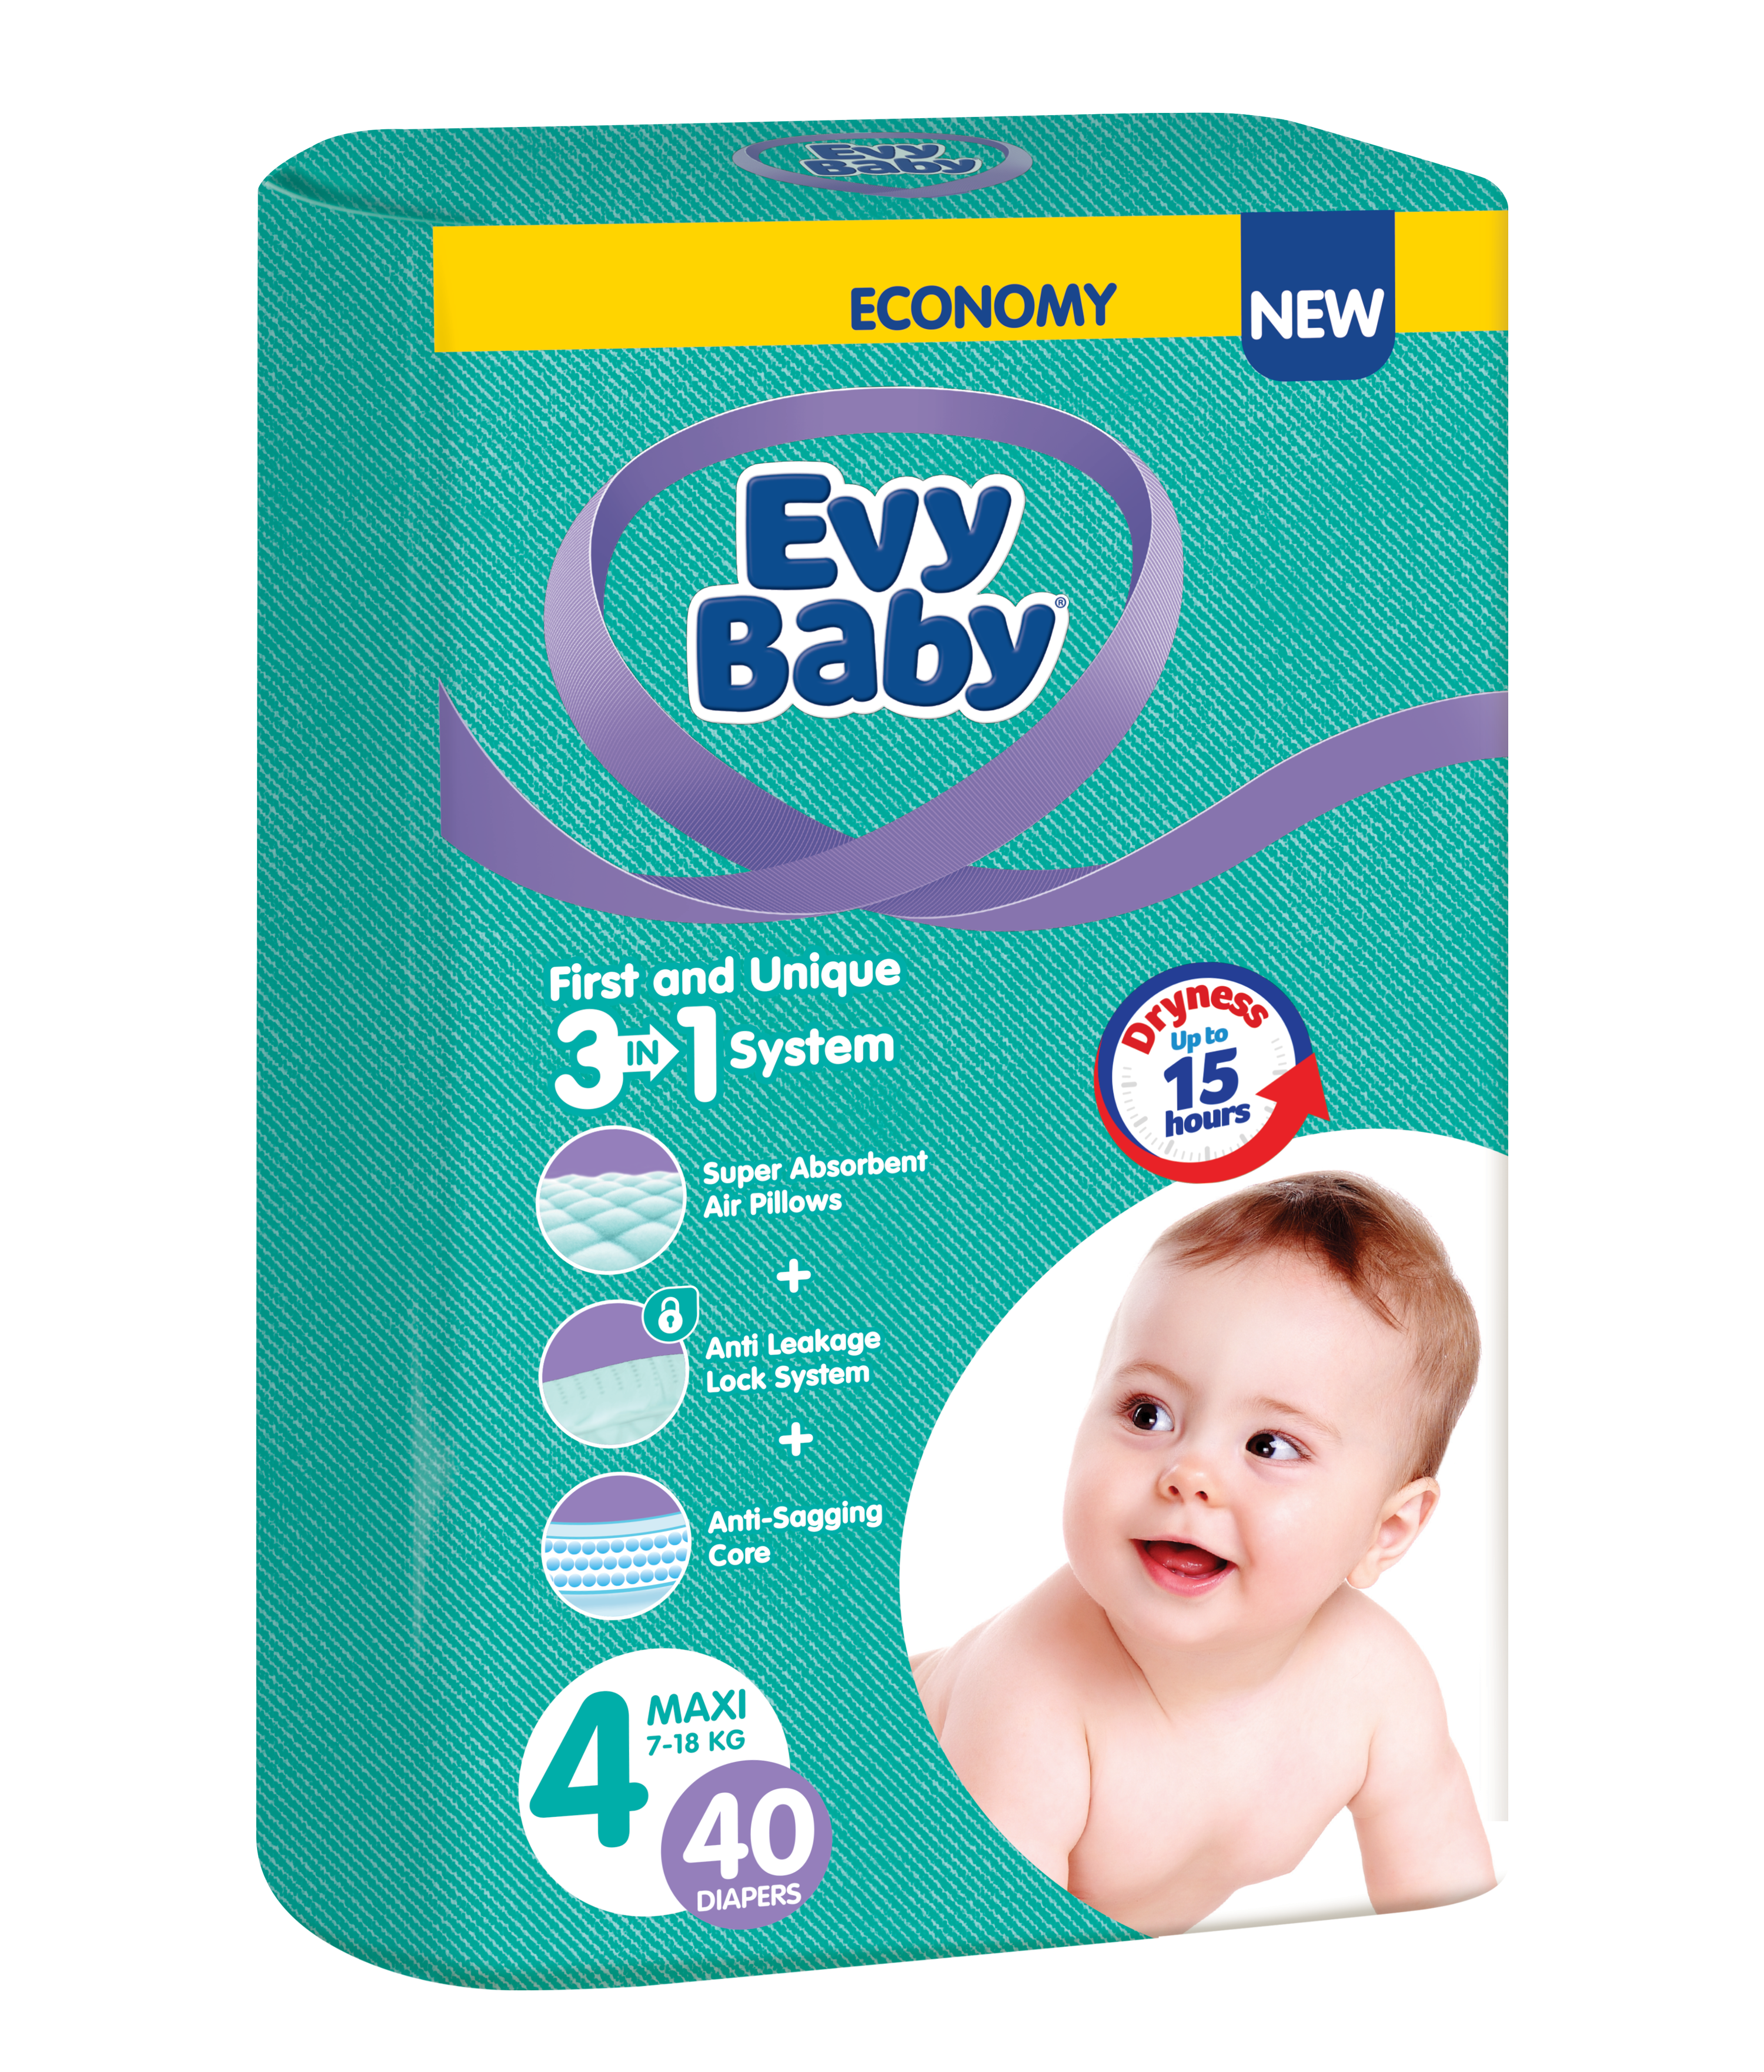 Evy Baby Twin maxi 7-18kg 40/1